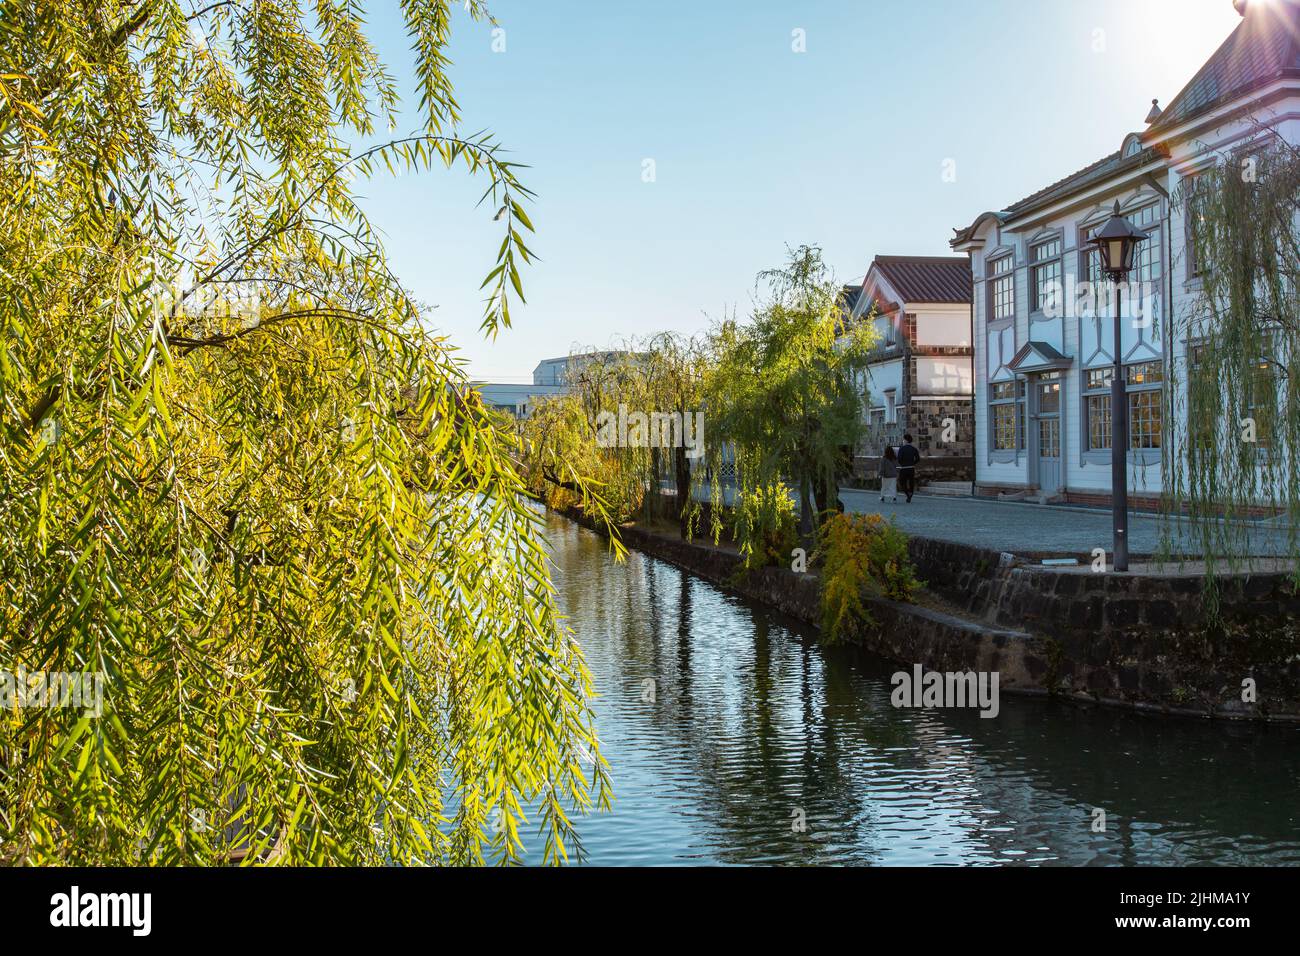 The townscape of Kurashiki Bikan Historical Quarter in sunny day. It is a historic area with old architectures, shops, restaurants and galleries situa Stock Photo